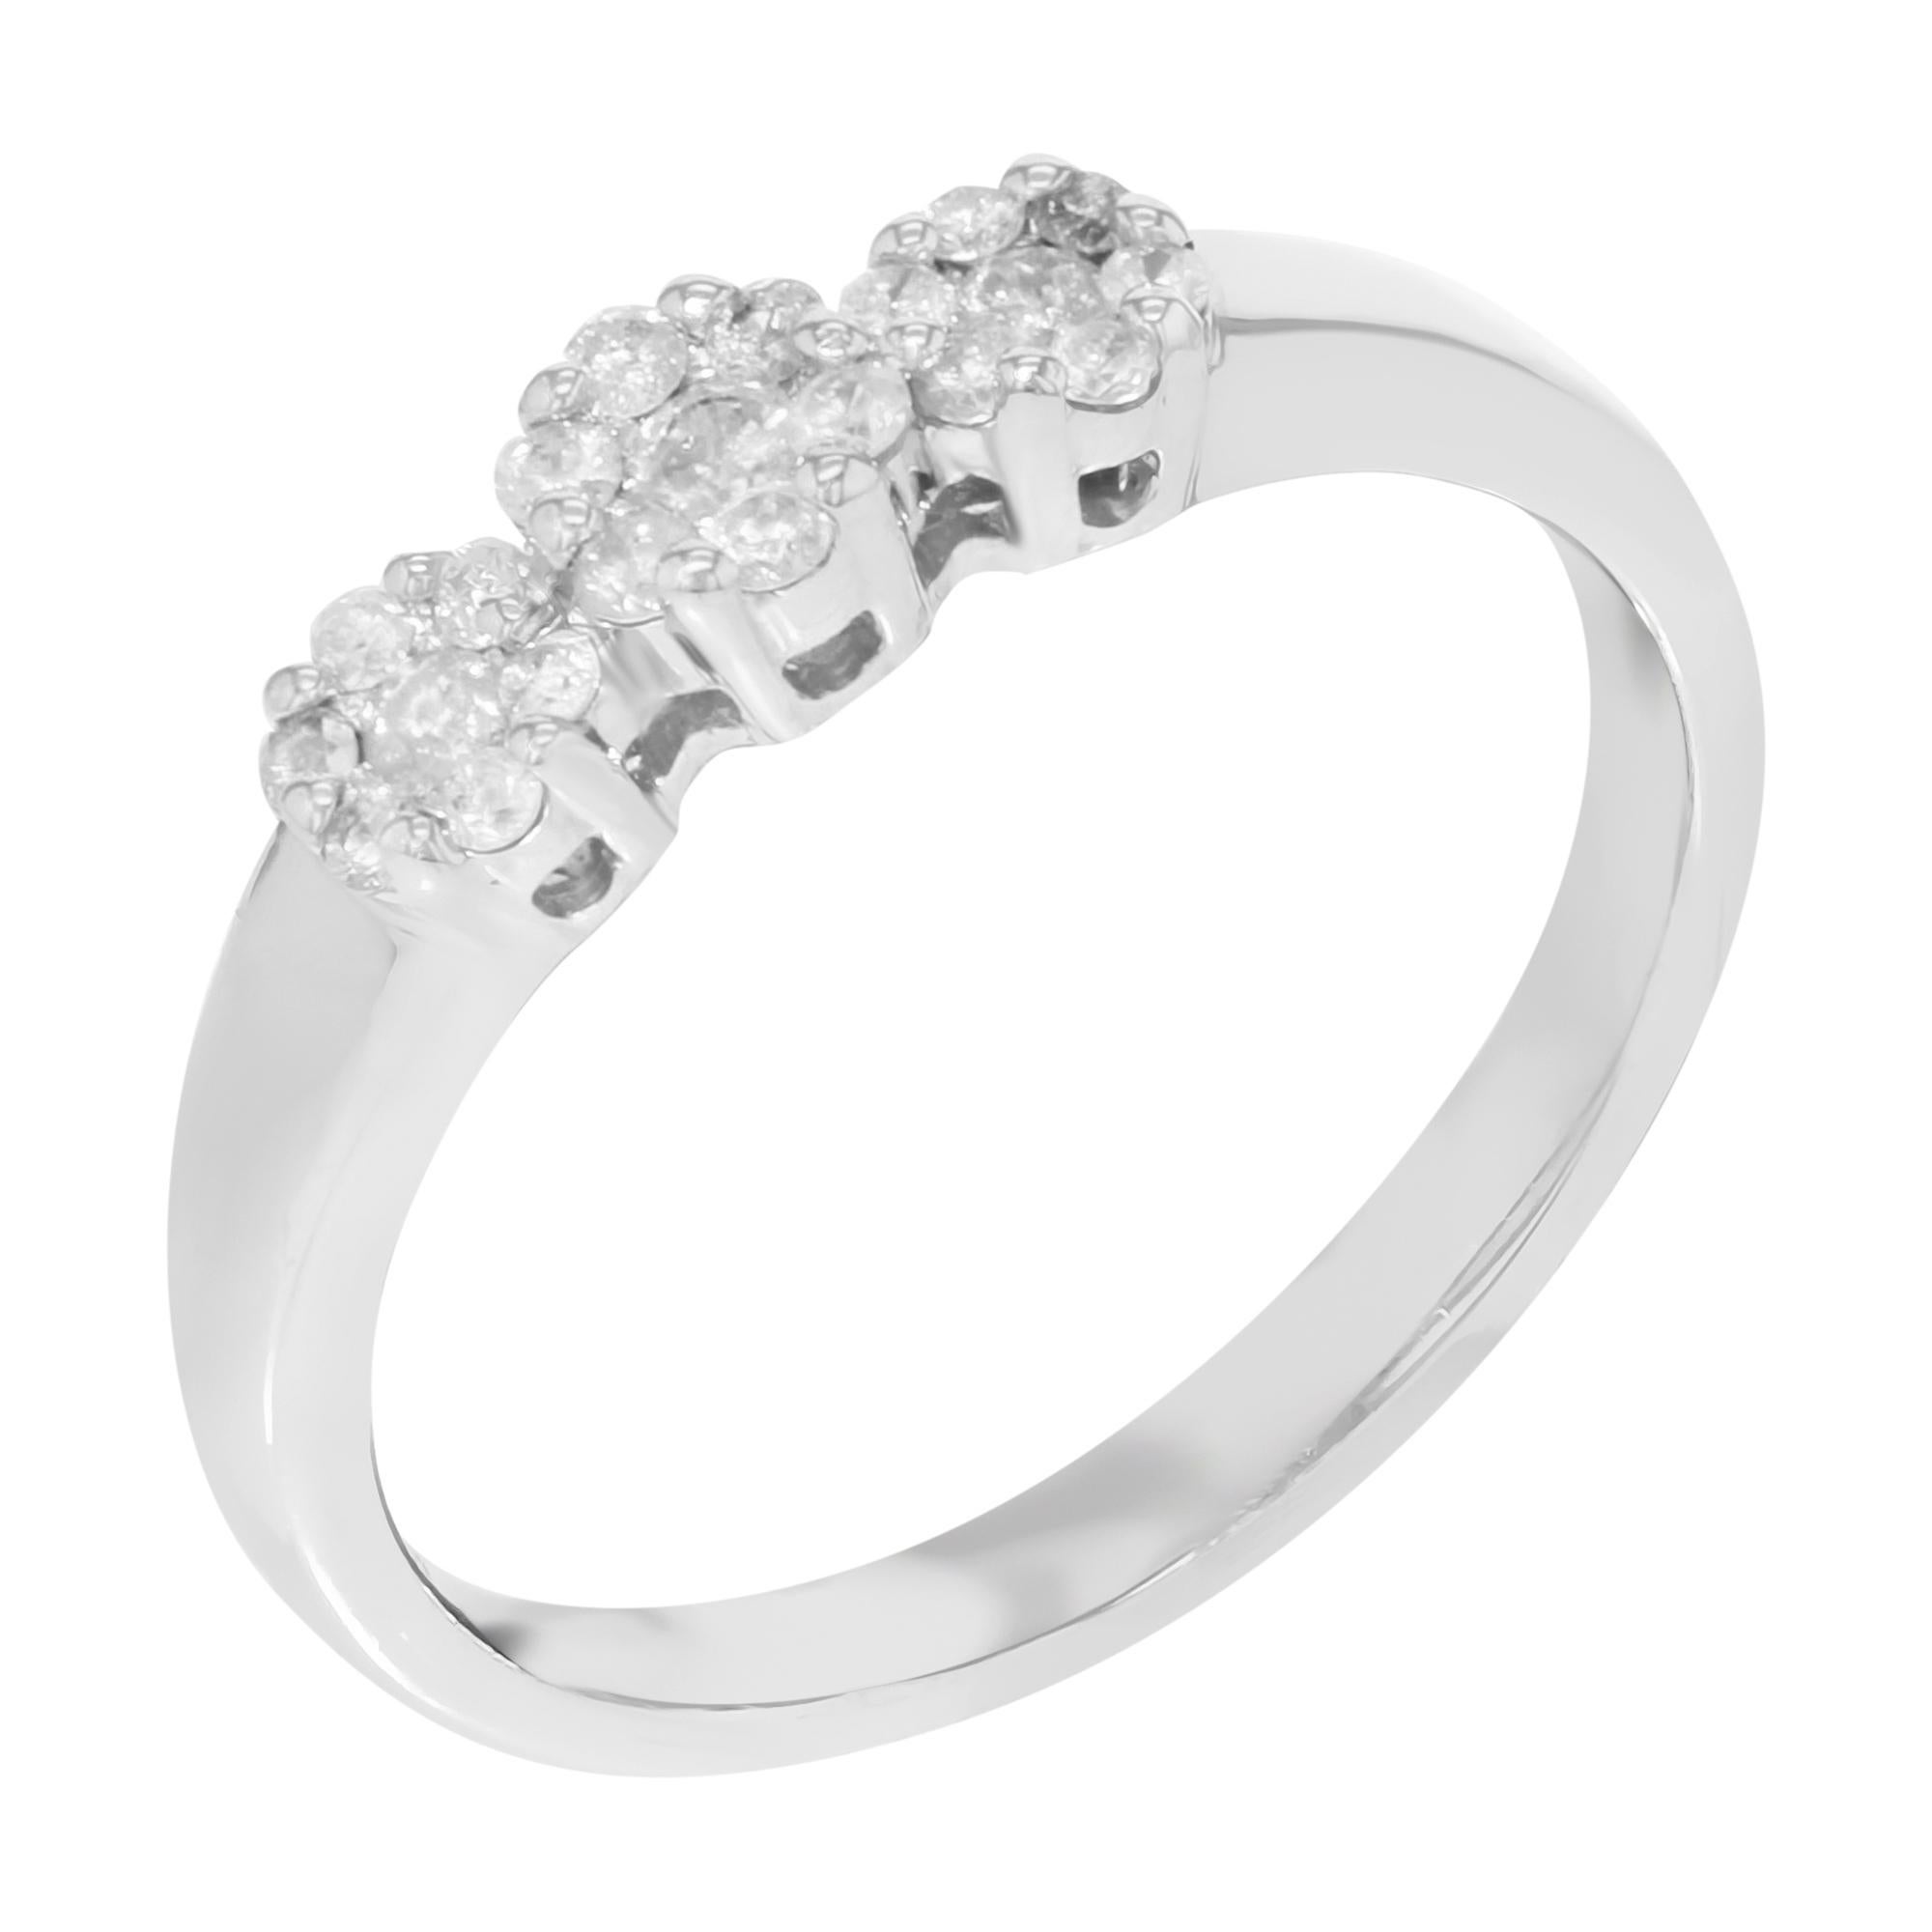 This diamond wedding band from our Rachel Koen Bridal Collection could be a great option to celebrate the day you exchange vows with the love of your life. The 14k white gold has been expertly polished to give it an immaculate sparkle. The ring is